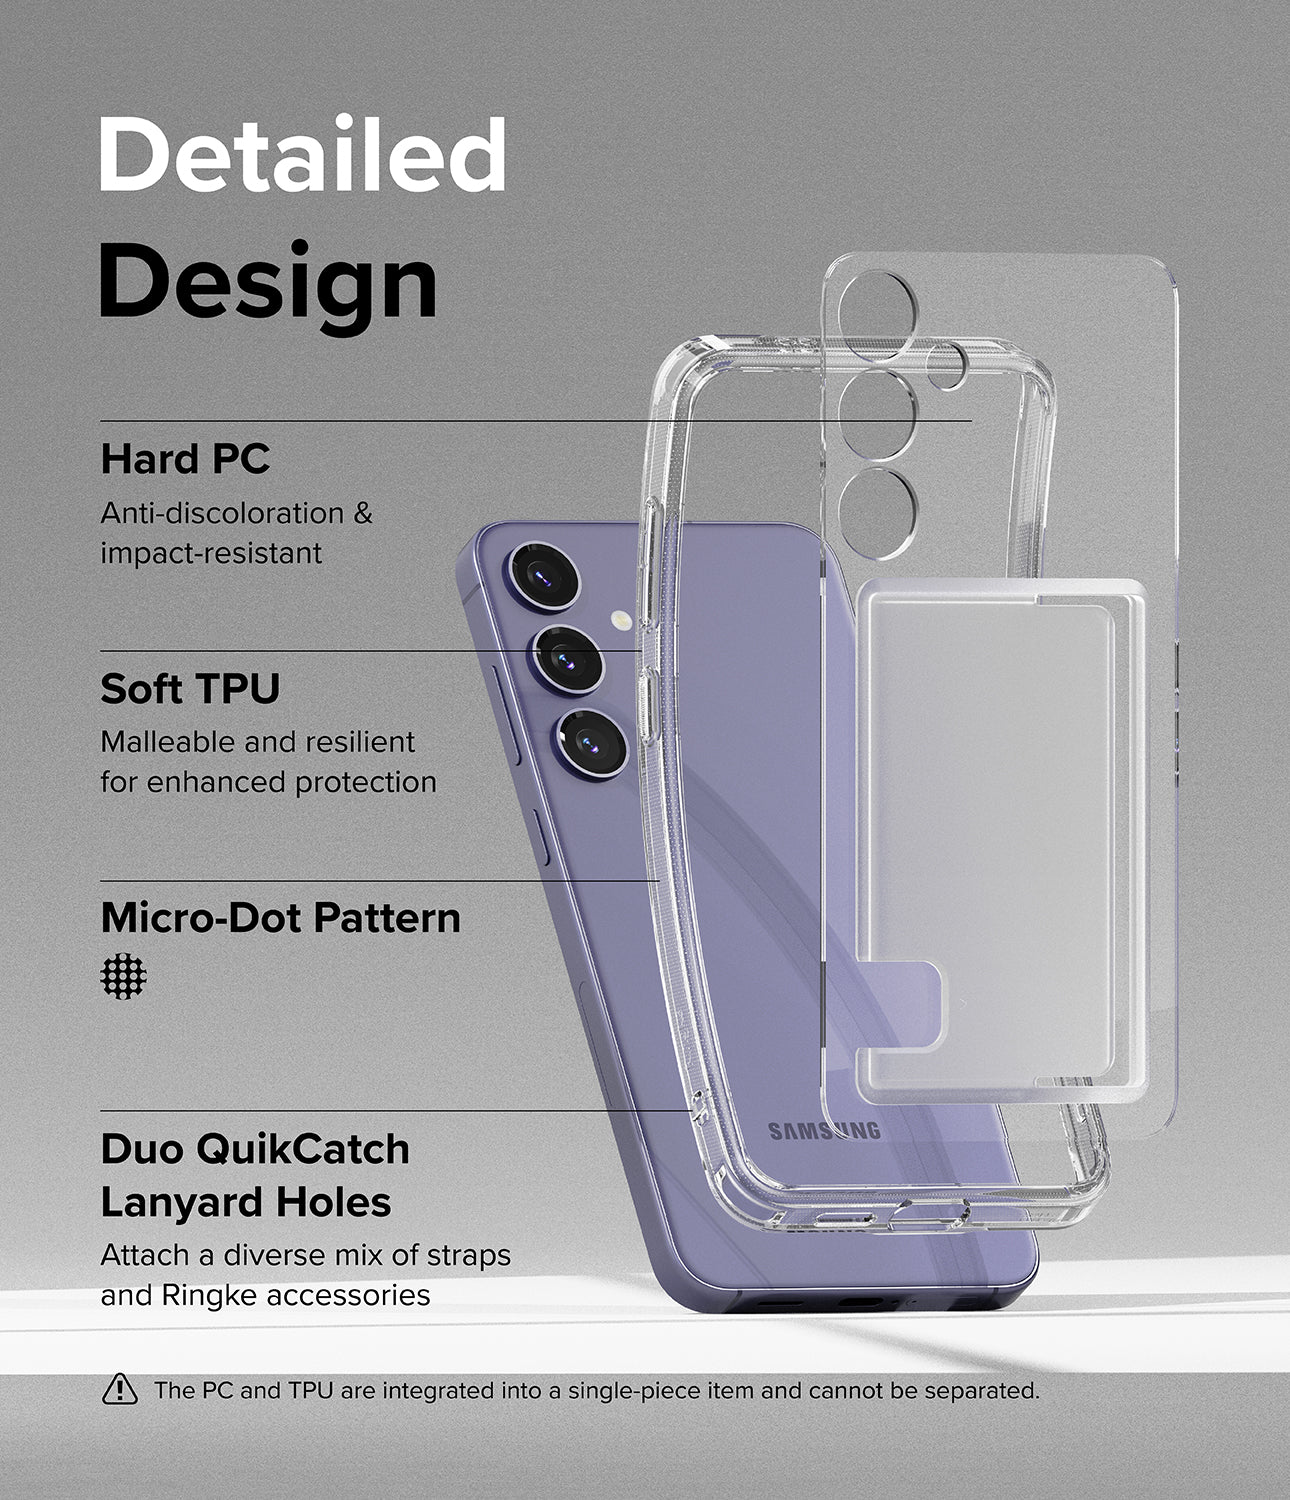 Galaxy S24 Plus Case | Fusion Card - Detailed Design. Anti-discoloration and impact-resistant with Hard PC. Malleable and resilient for enhanced protection with Soft TPU. Micro-Dot Pattern. Duo QuikCatch Lanyard Holes to attach a diverse mix of straps and Ringke accessories.